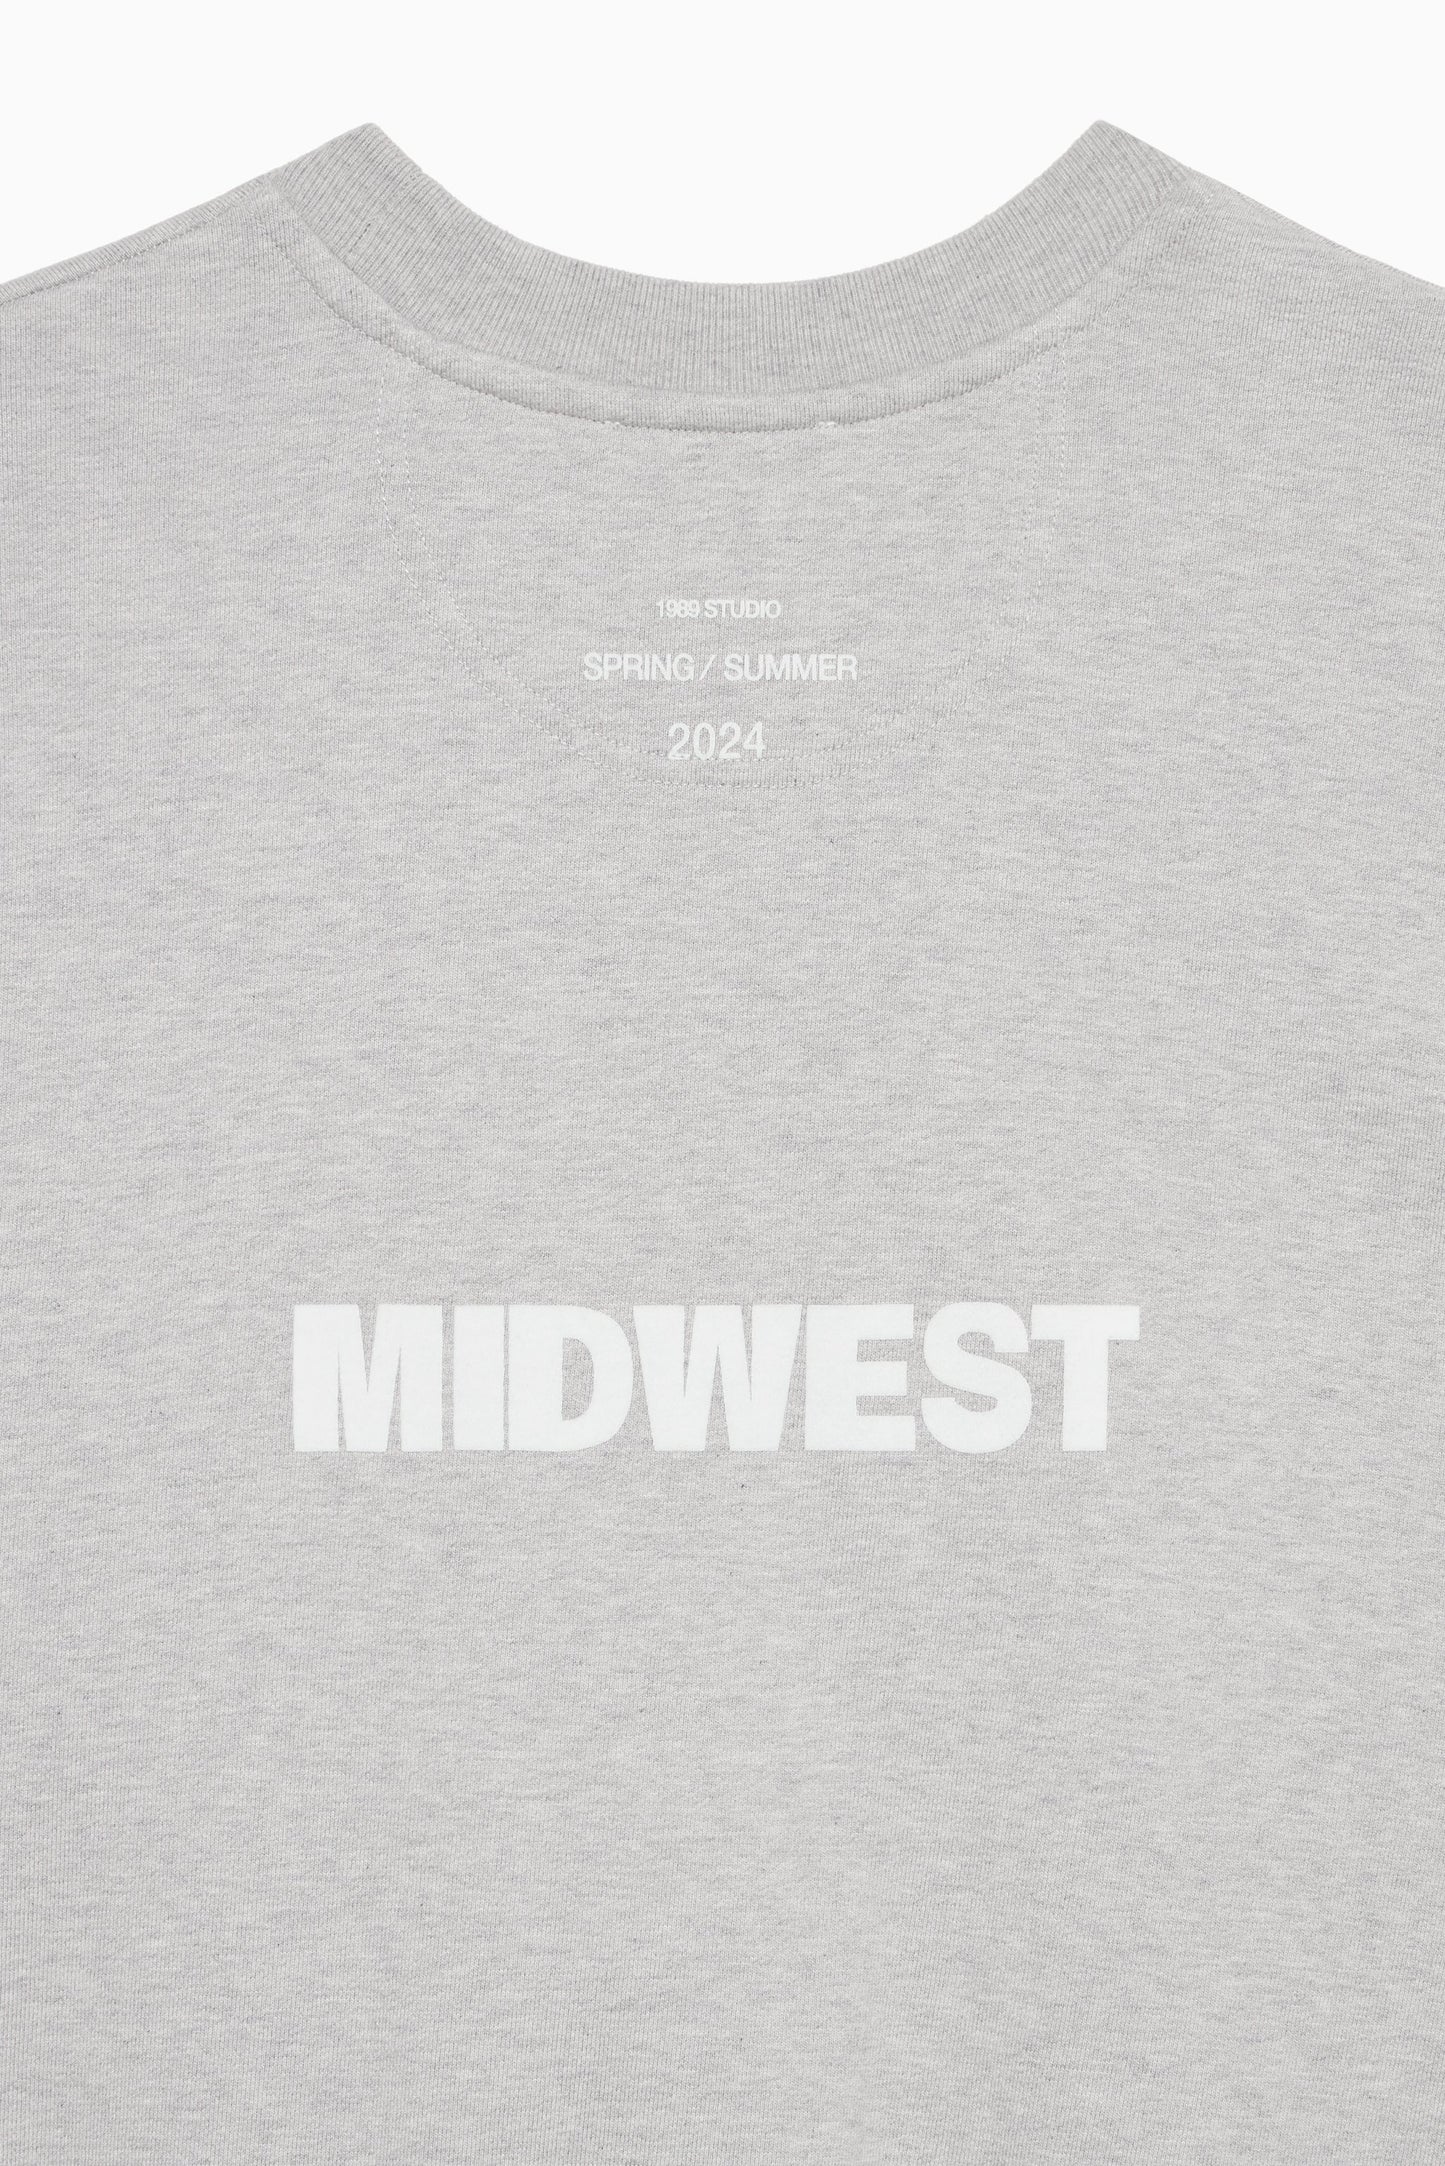 Woman's Midwest Relaxed Sweatshirt